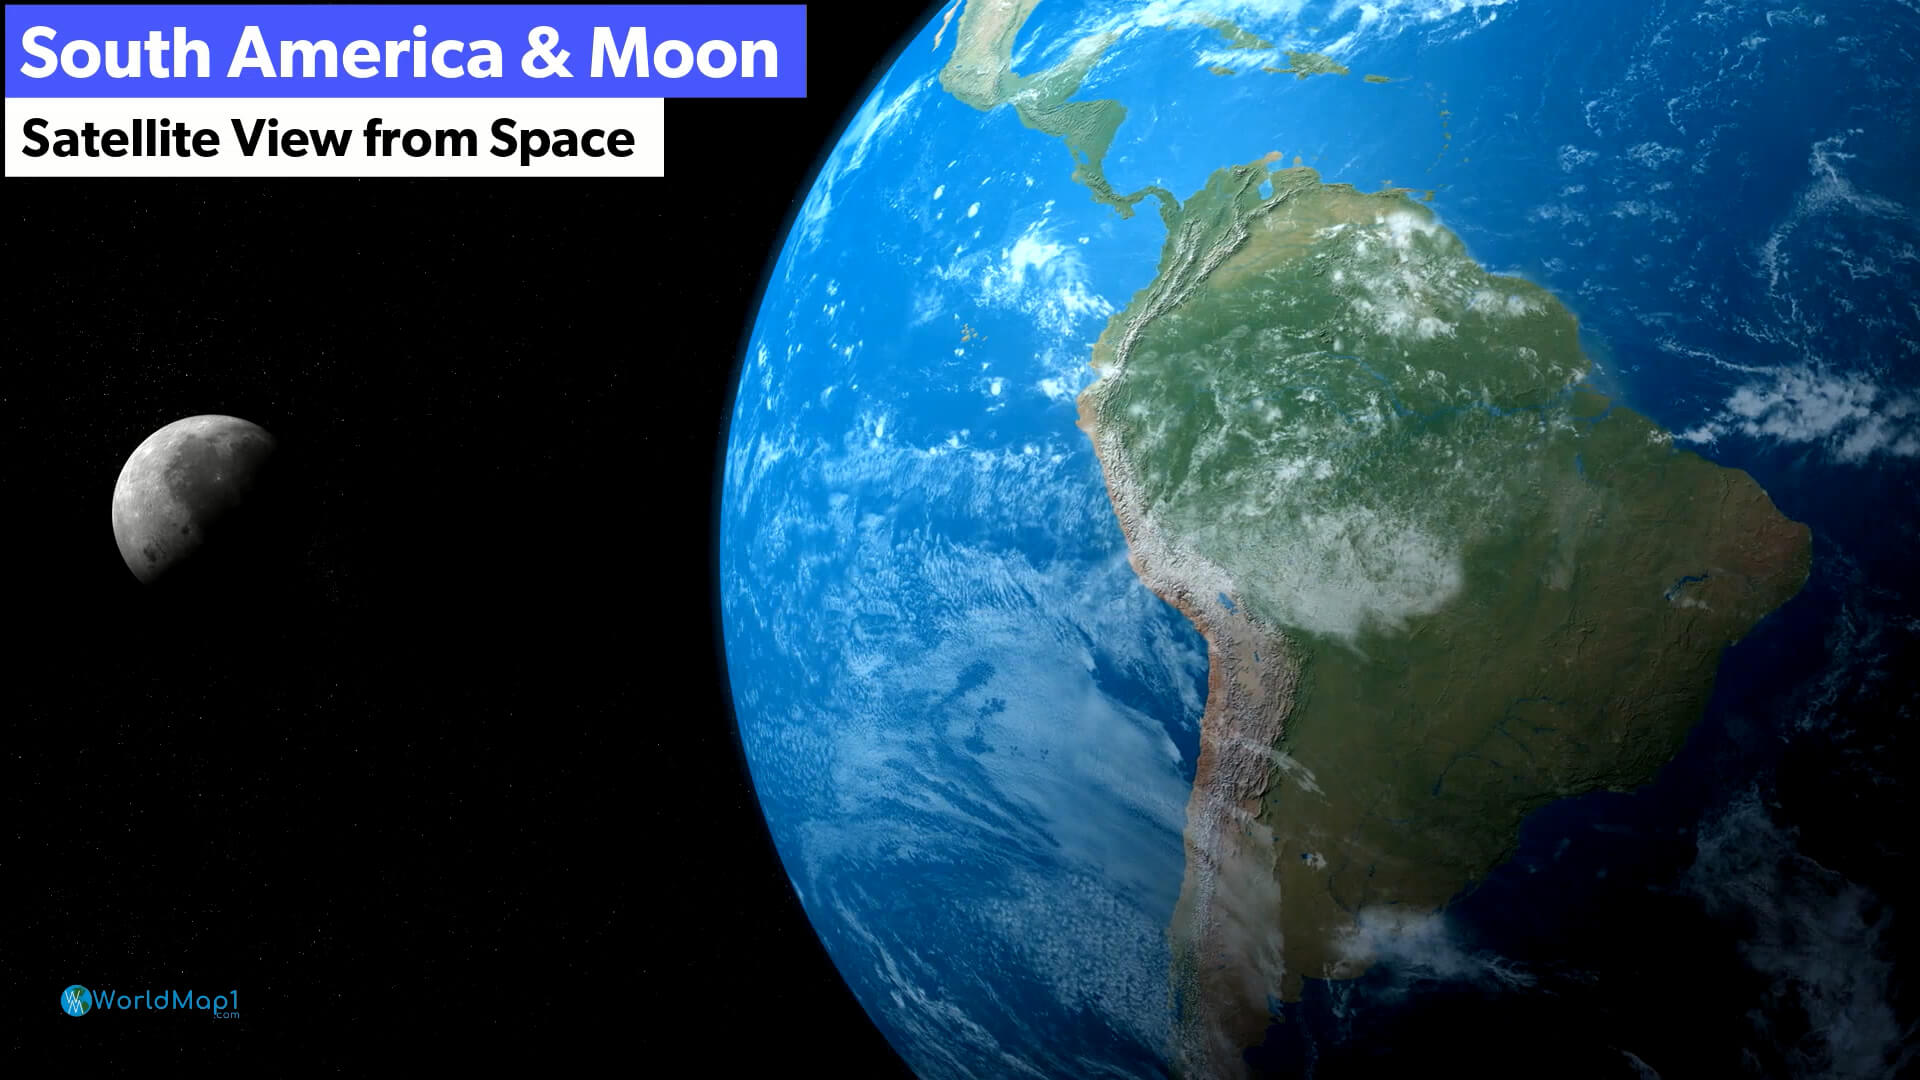 South America and Moon from Space